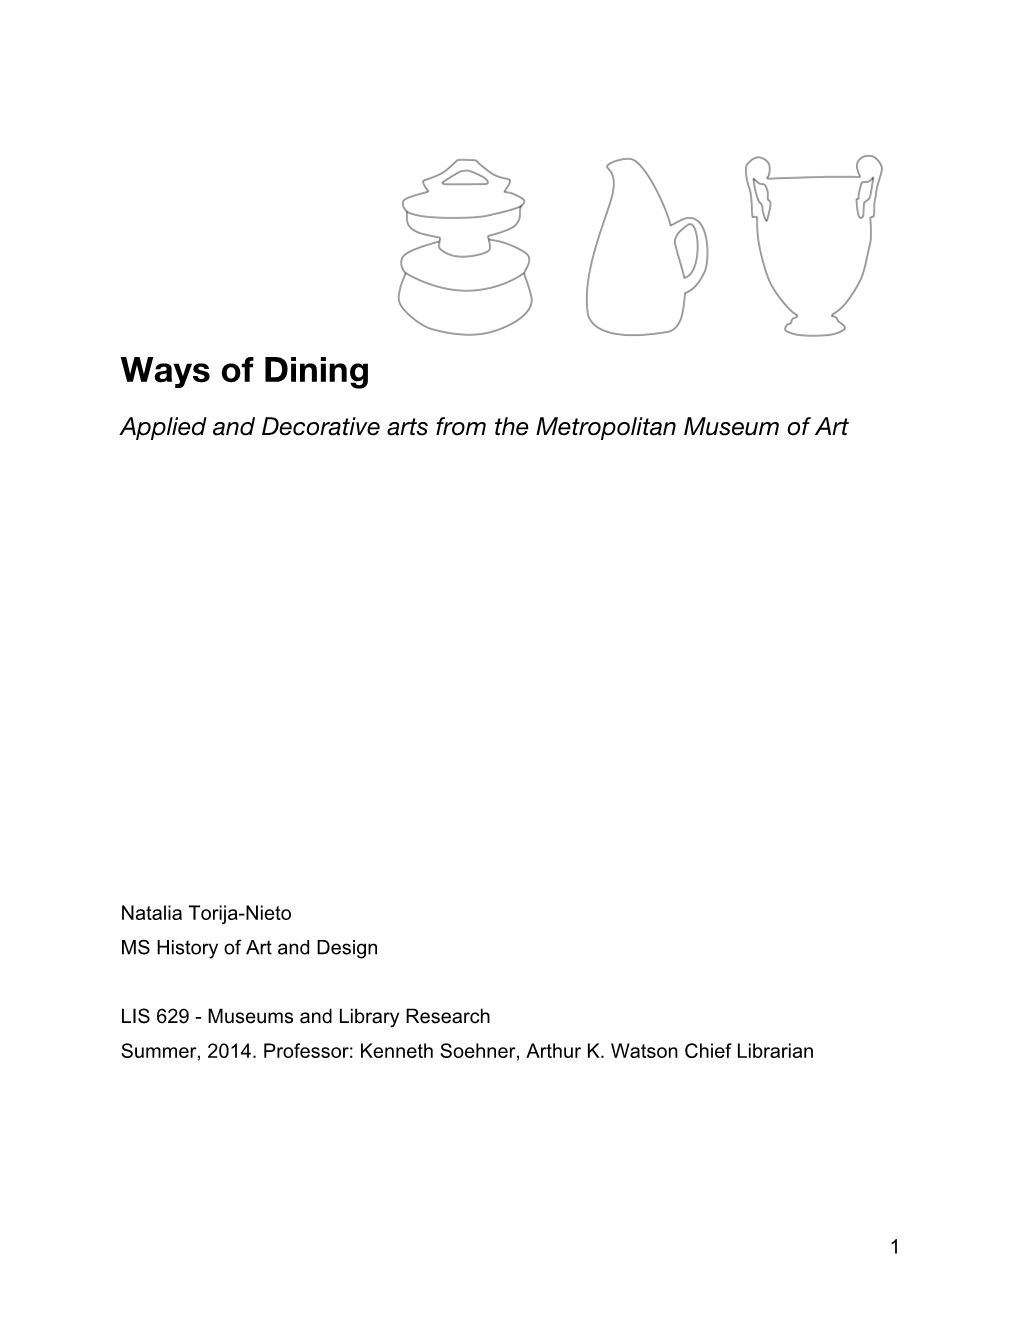 Ways of Dining: Applied and Decorative Arts from The